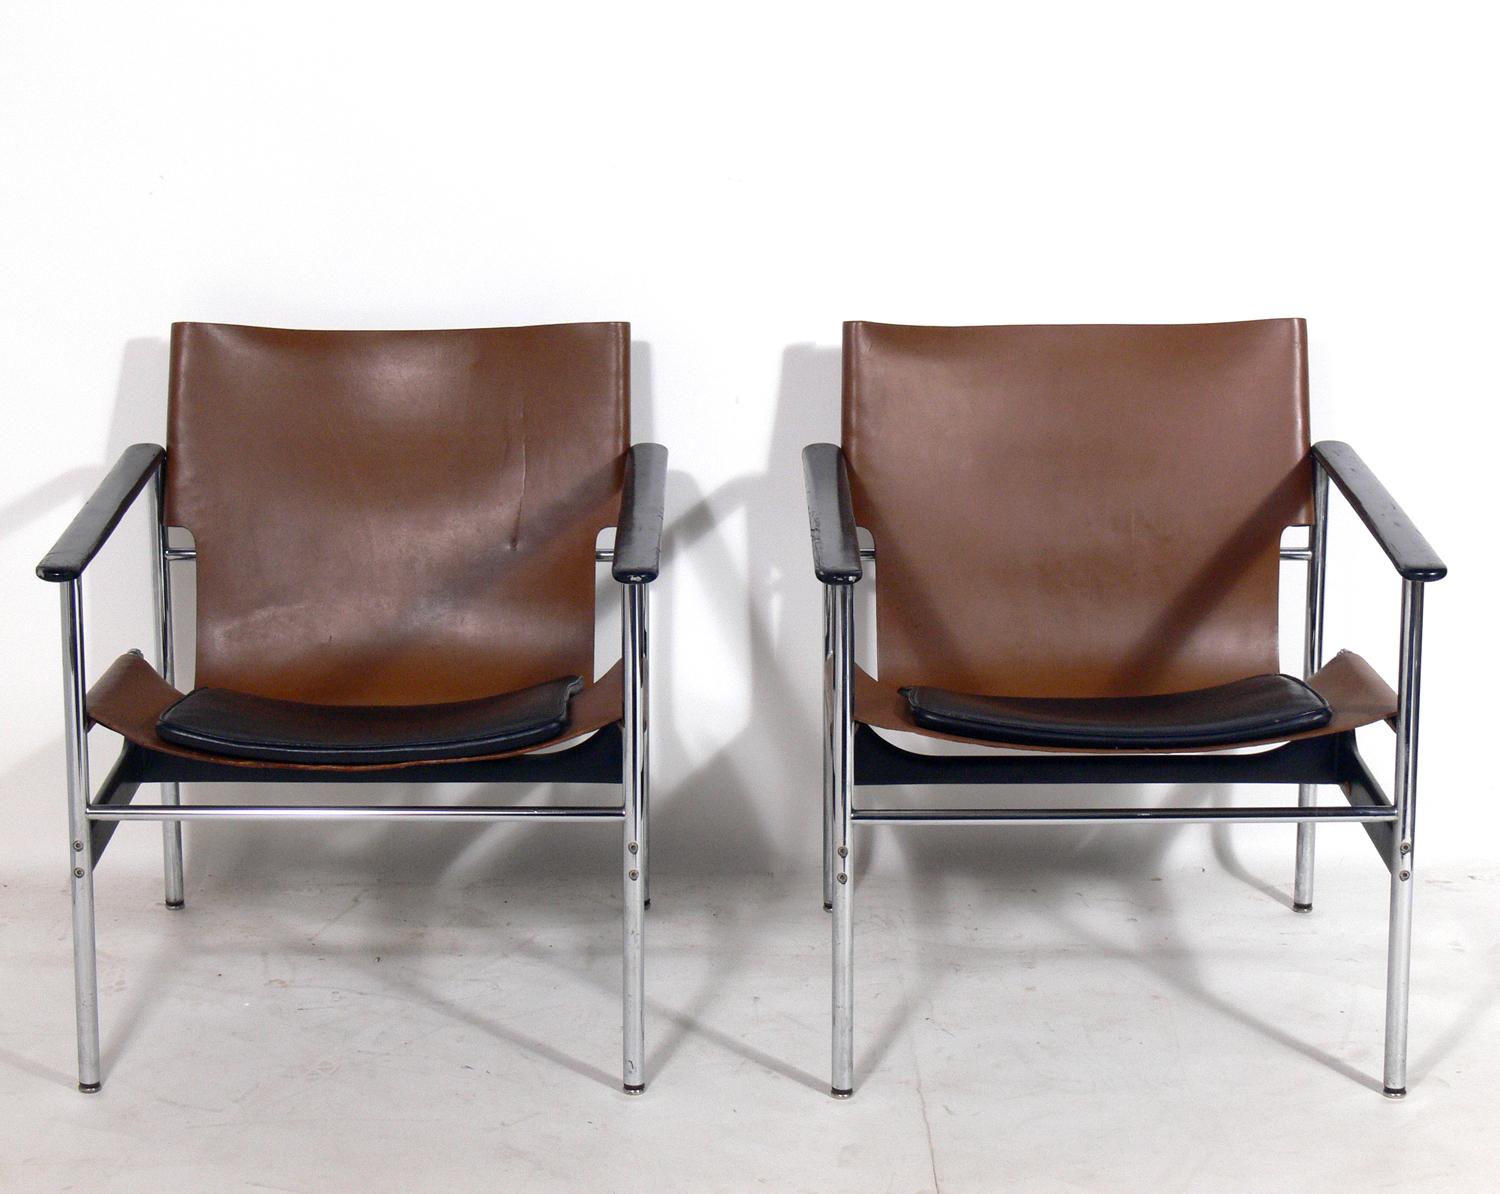 Pair of leather sling lounge chairs, designed by Charles Pollock for Knoll, American, circa 1960s. They retain their warm original patina to the original cognac leather sling seats.